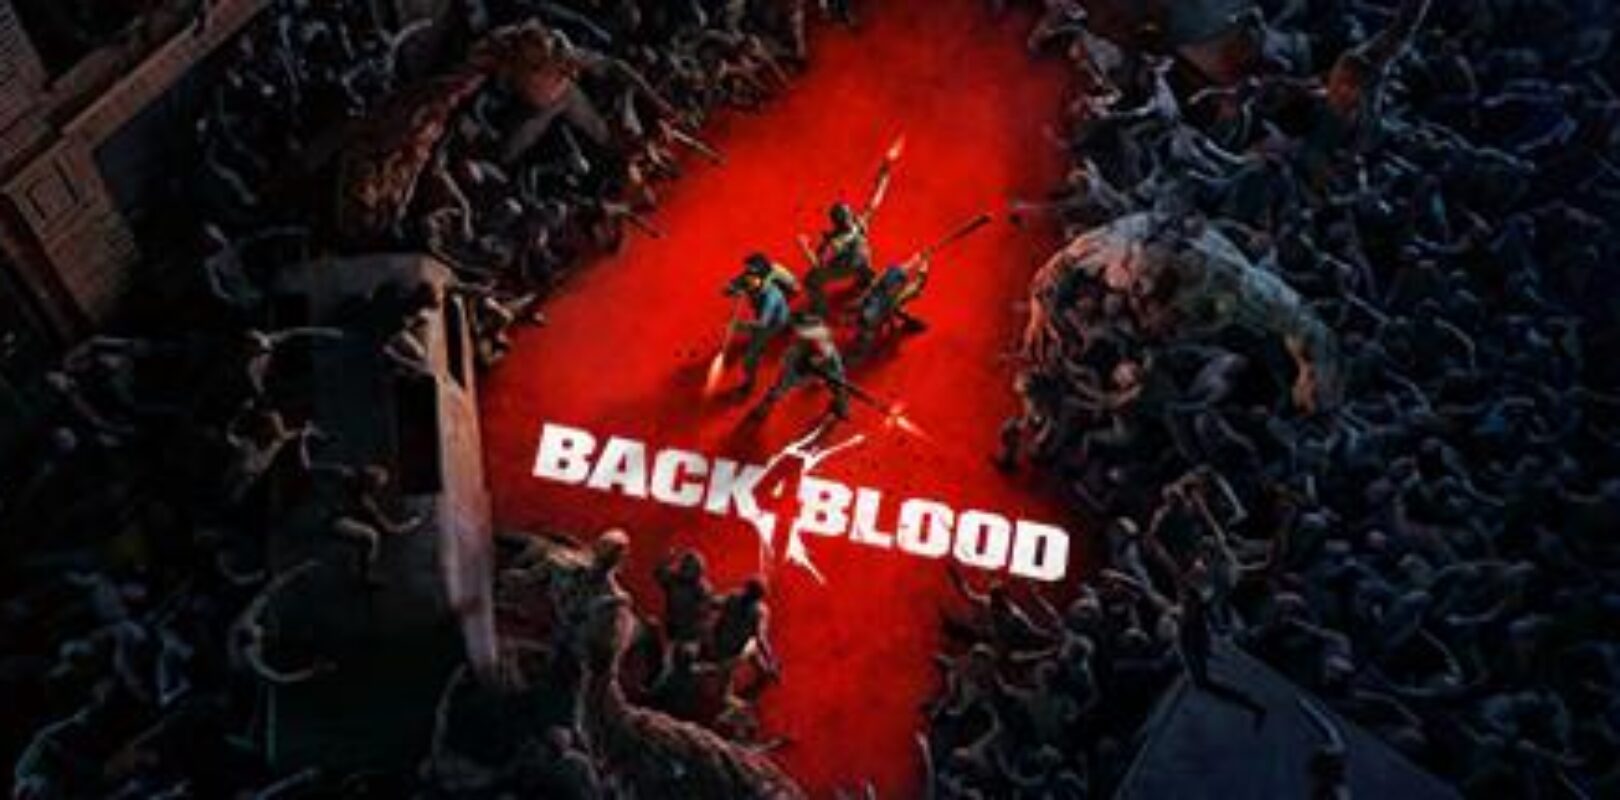 back 4 blood early access